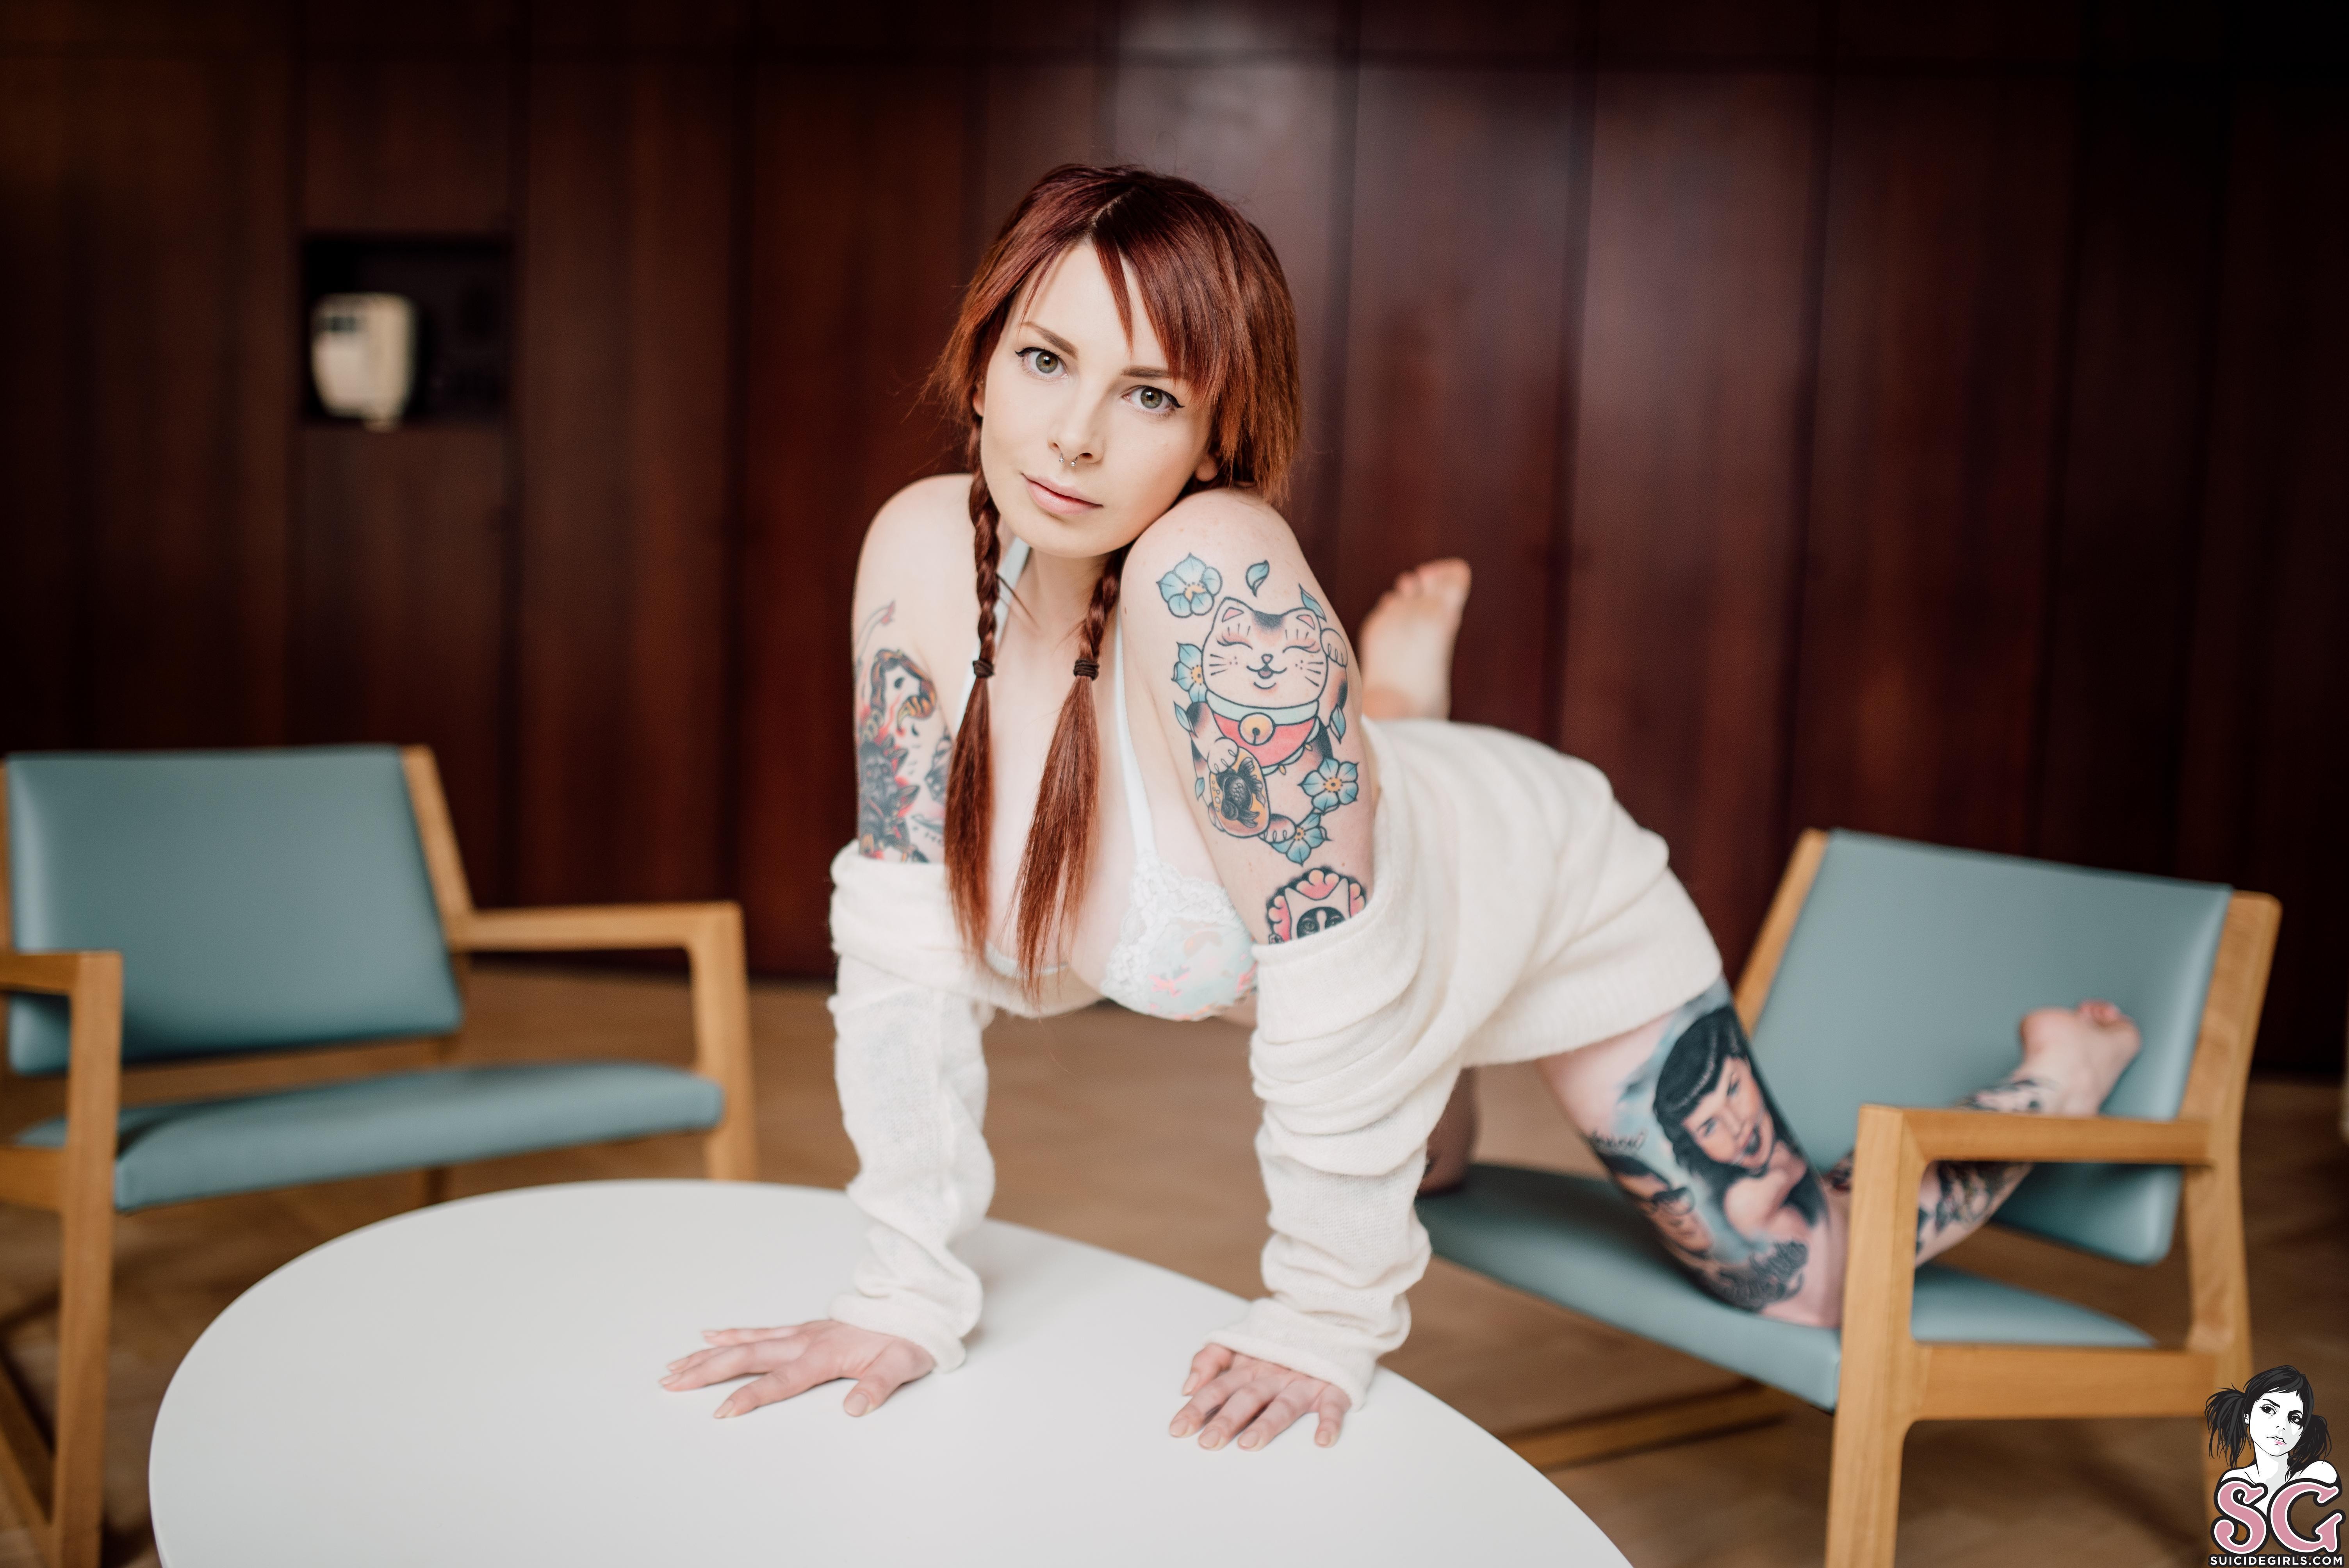 Image Beautiful Suicide Girl Peggysue How Soon Is Now 05 Big curvy Assets H...